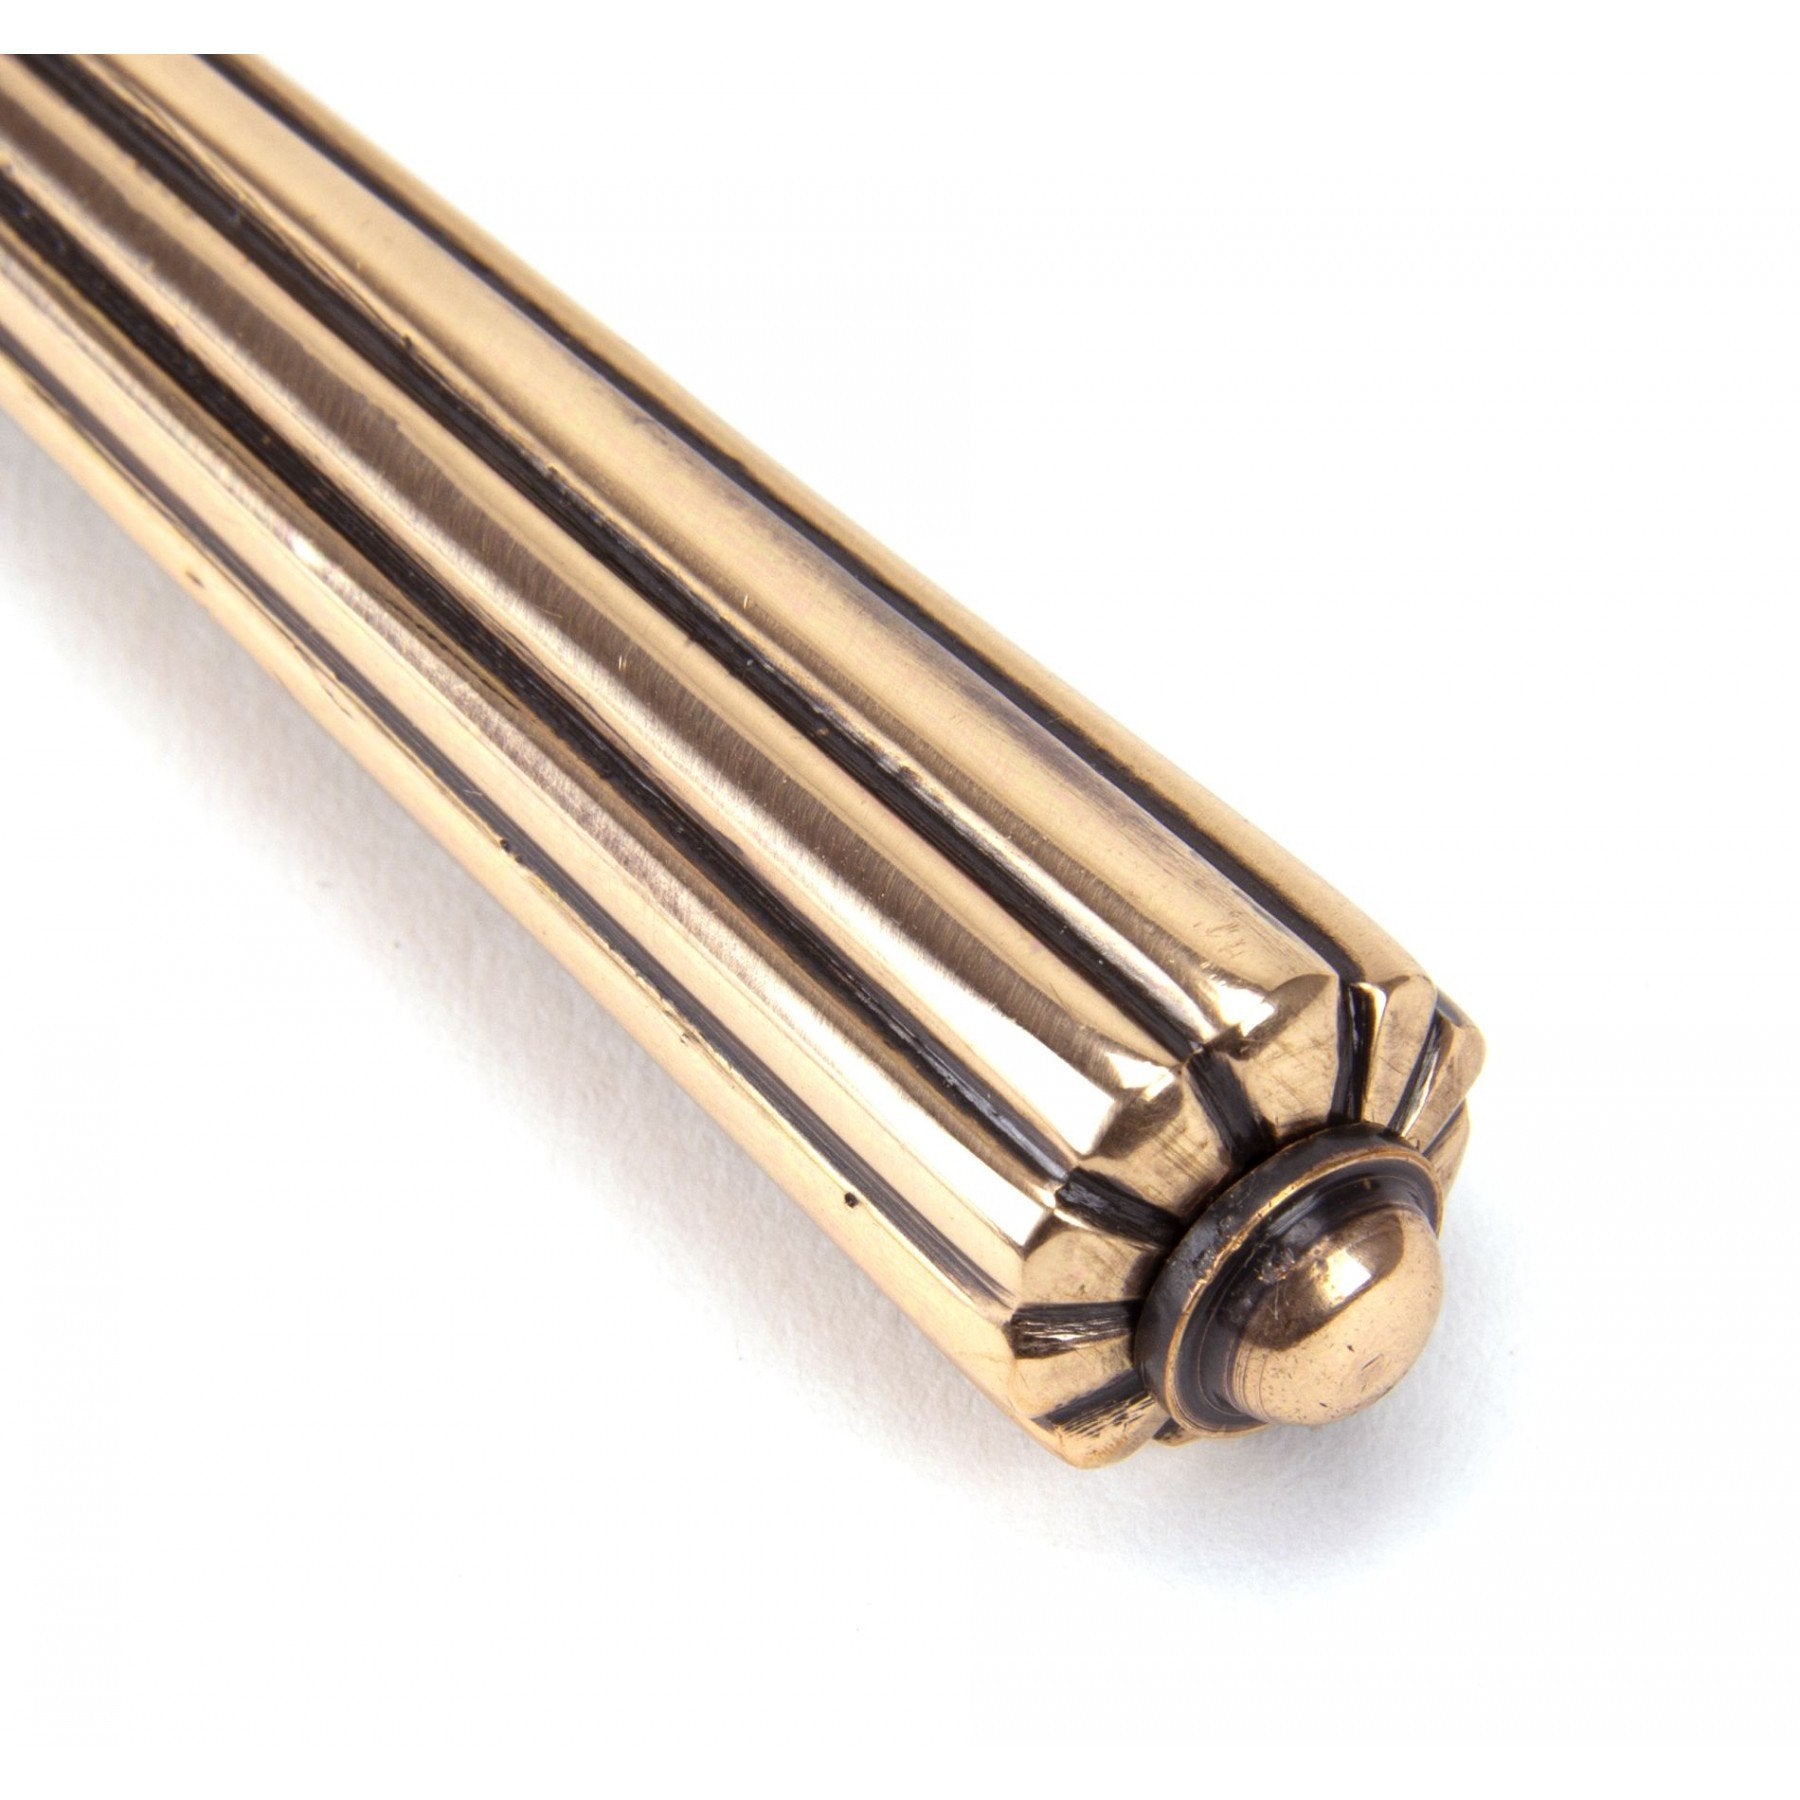 From the Anvil Polished Bronze Night-Vent Locking Hinton Fastener - No.42 Interiors